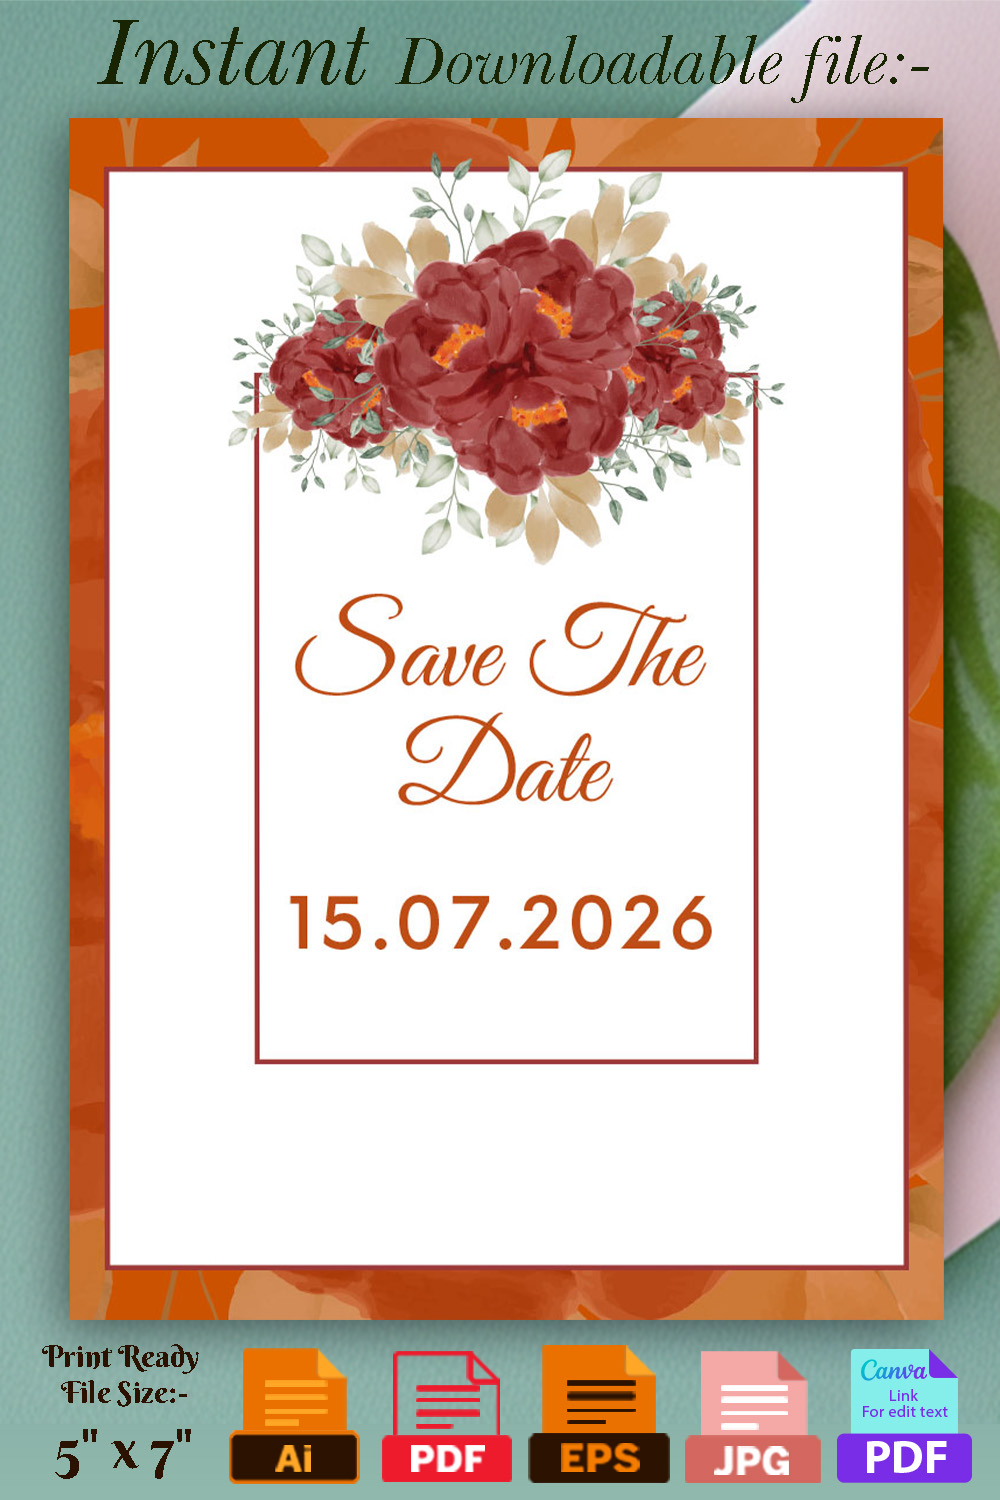 Image of exquisite wedding invitation with flowers.